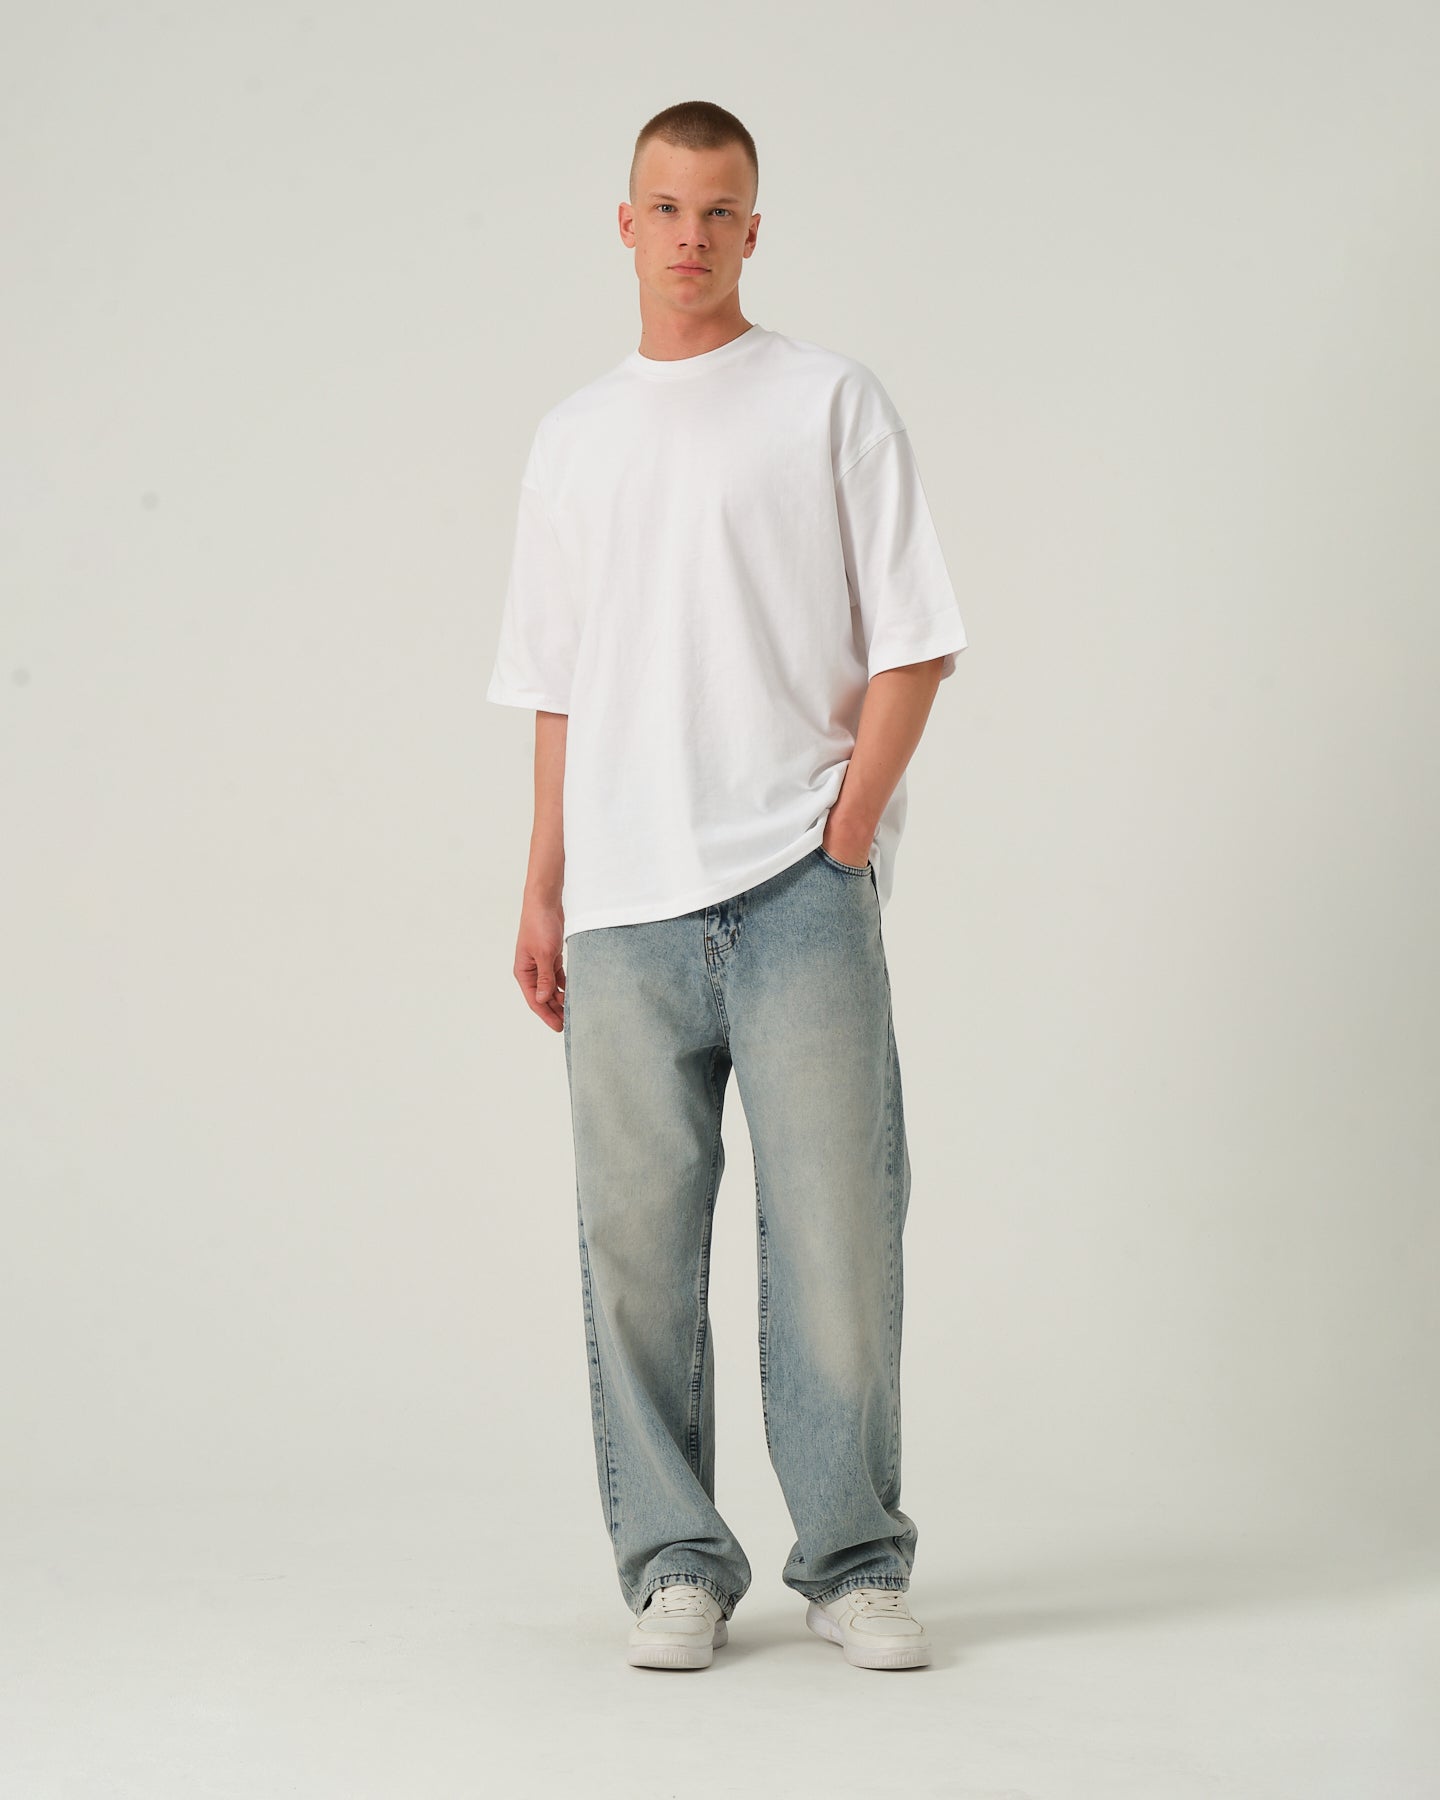 Relax Baggy Fit Jean -Super Sonic